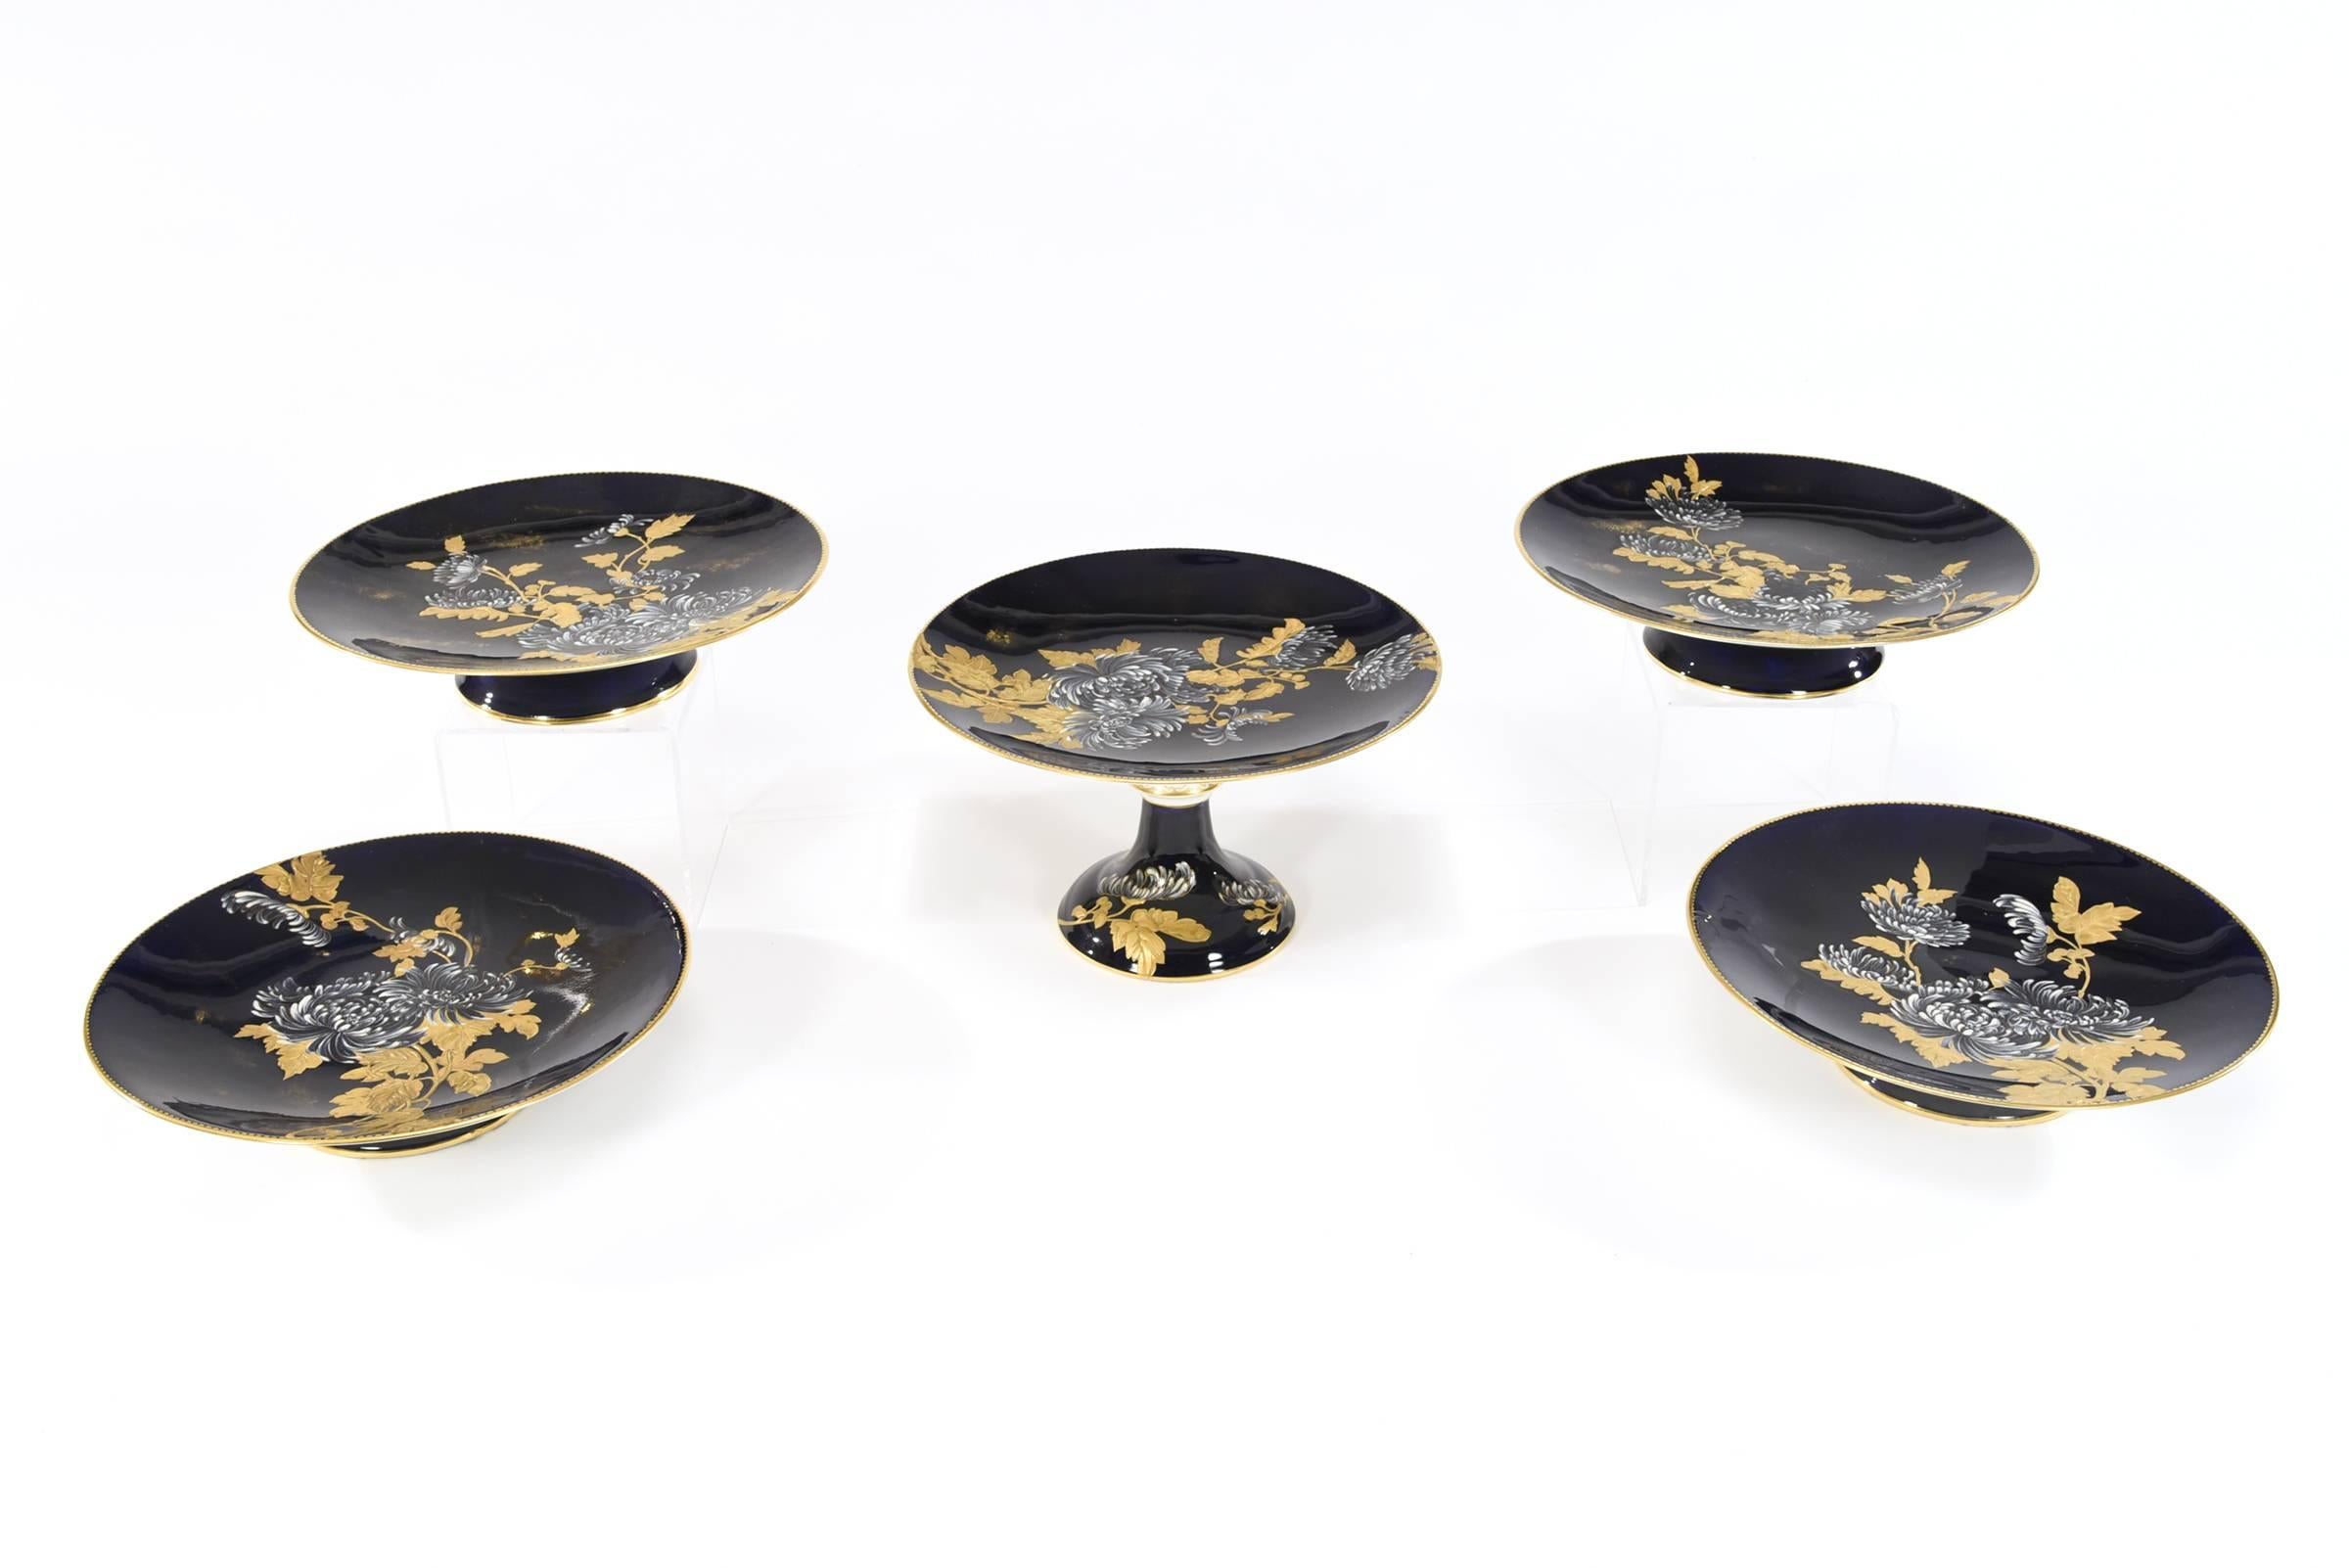 Made by the renown English porcelain firm of Davenport, this set of ten dessert plates and five serving pieces are all hand painted with a variety of chrysanthemums and foliage. What sets this apart is the fantastic contrast of raised paste gold and